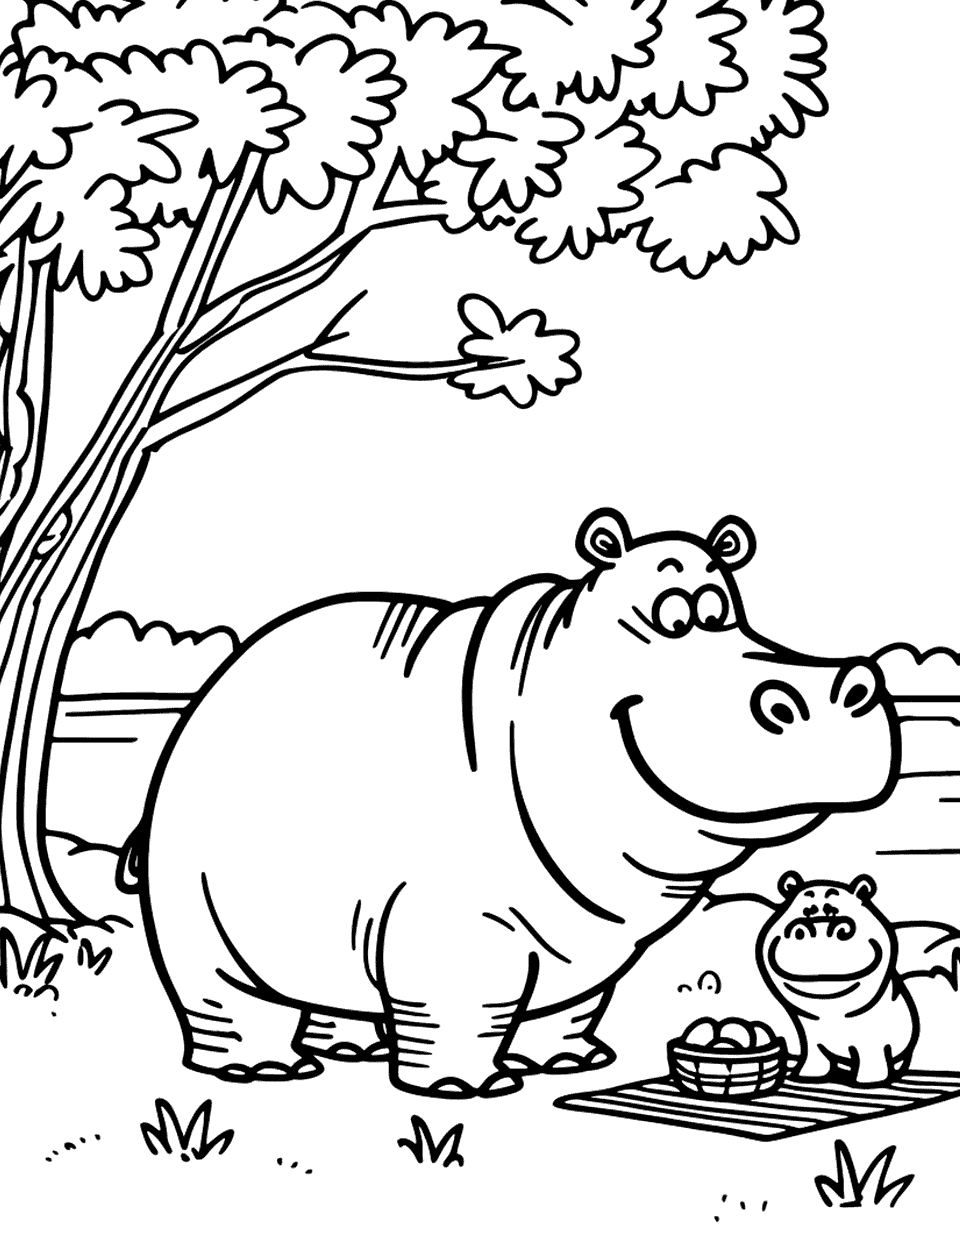 Hippo Family Picnic Coloring Page - A family of hippos enjoying a picnic under a shady tree by the lake.